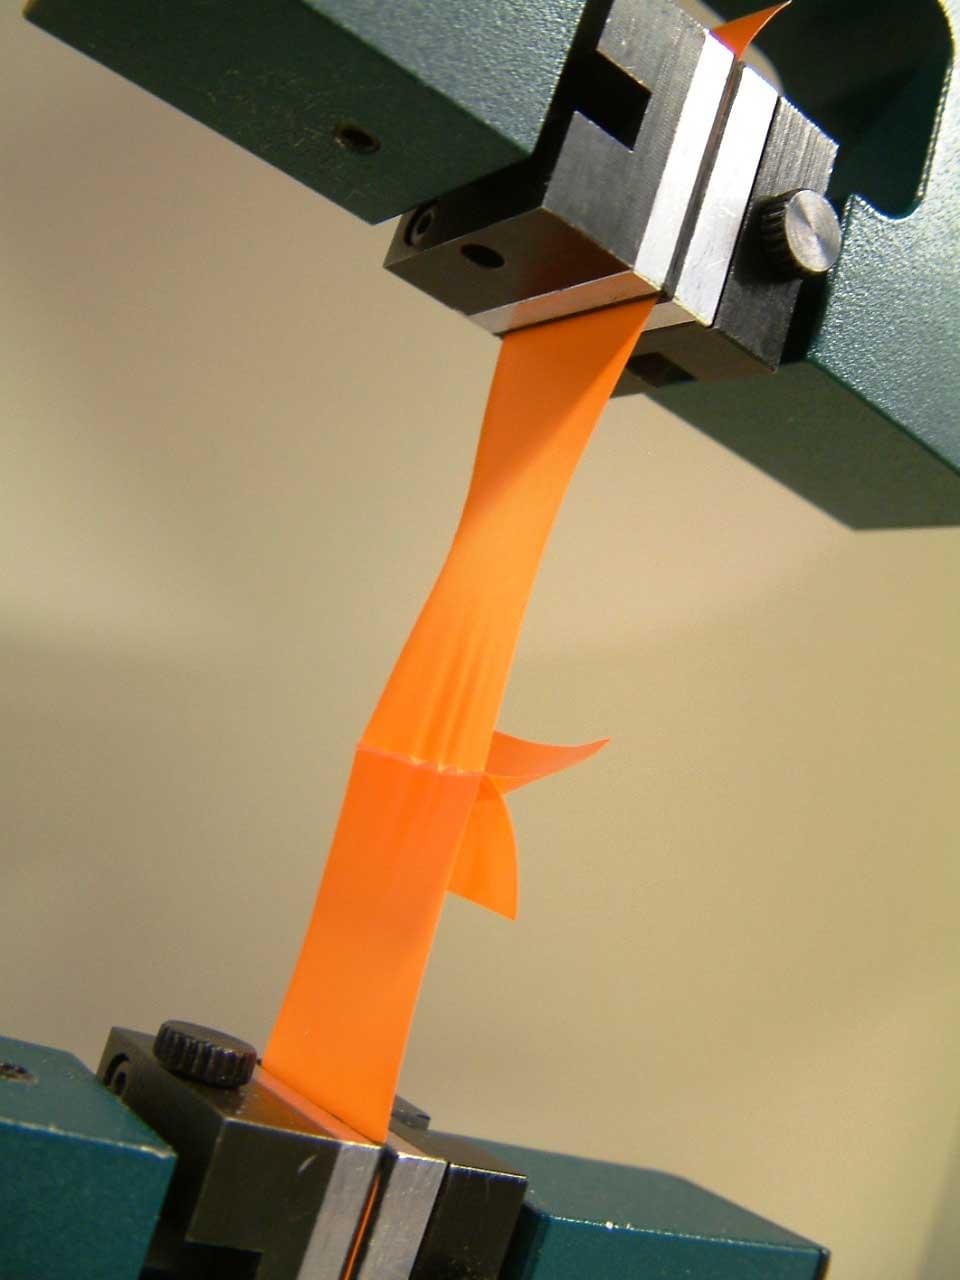 A close up view of plastic tensile testing, where plastic is effectively being stretched in different directions.